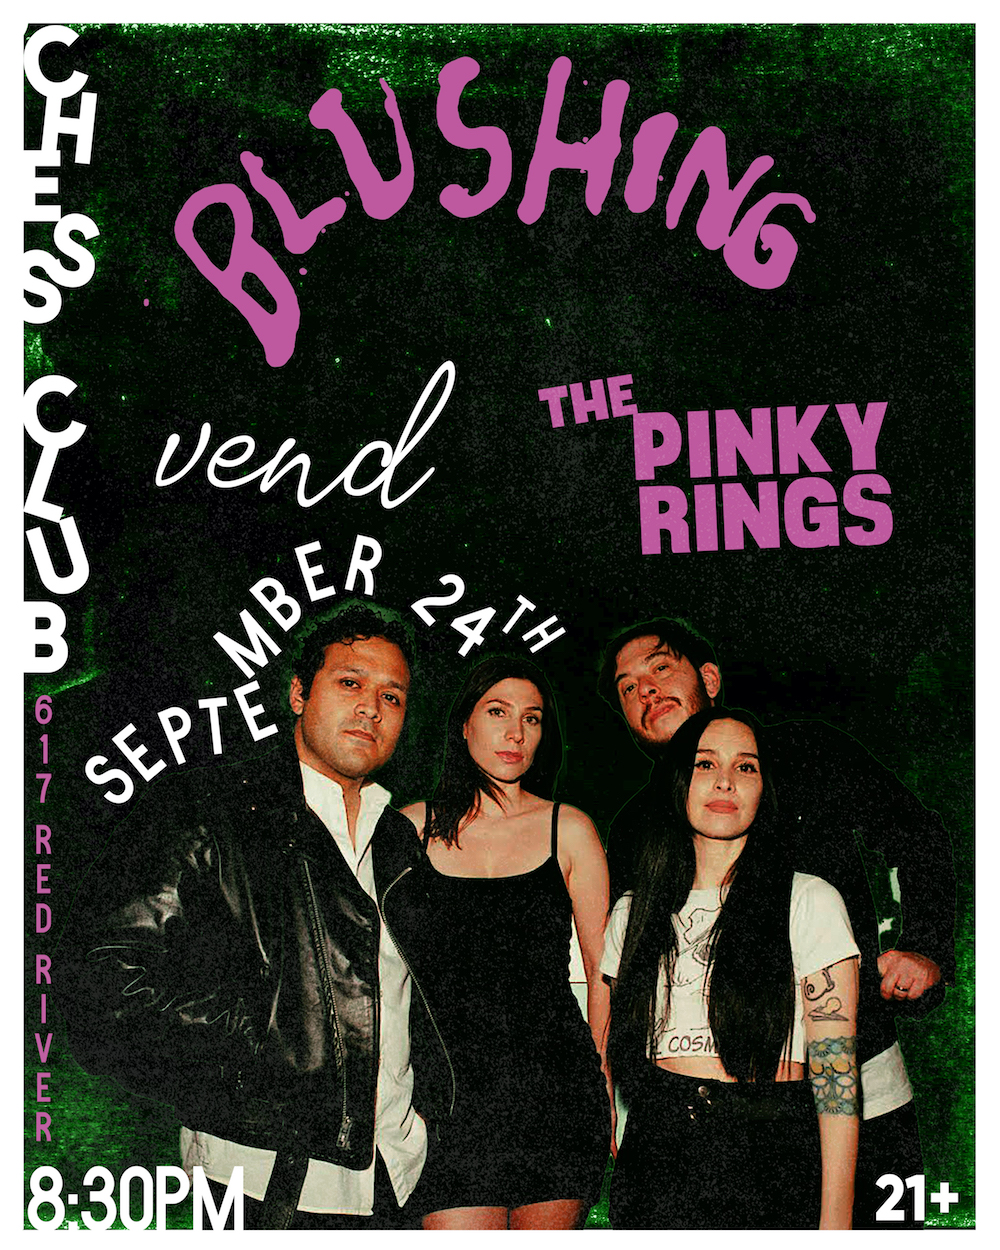 The Pinky Rings // Blushing // Vend